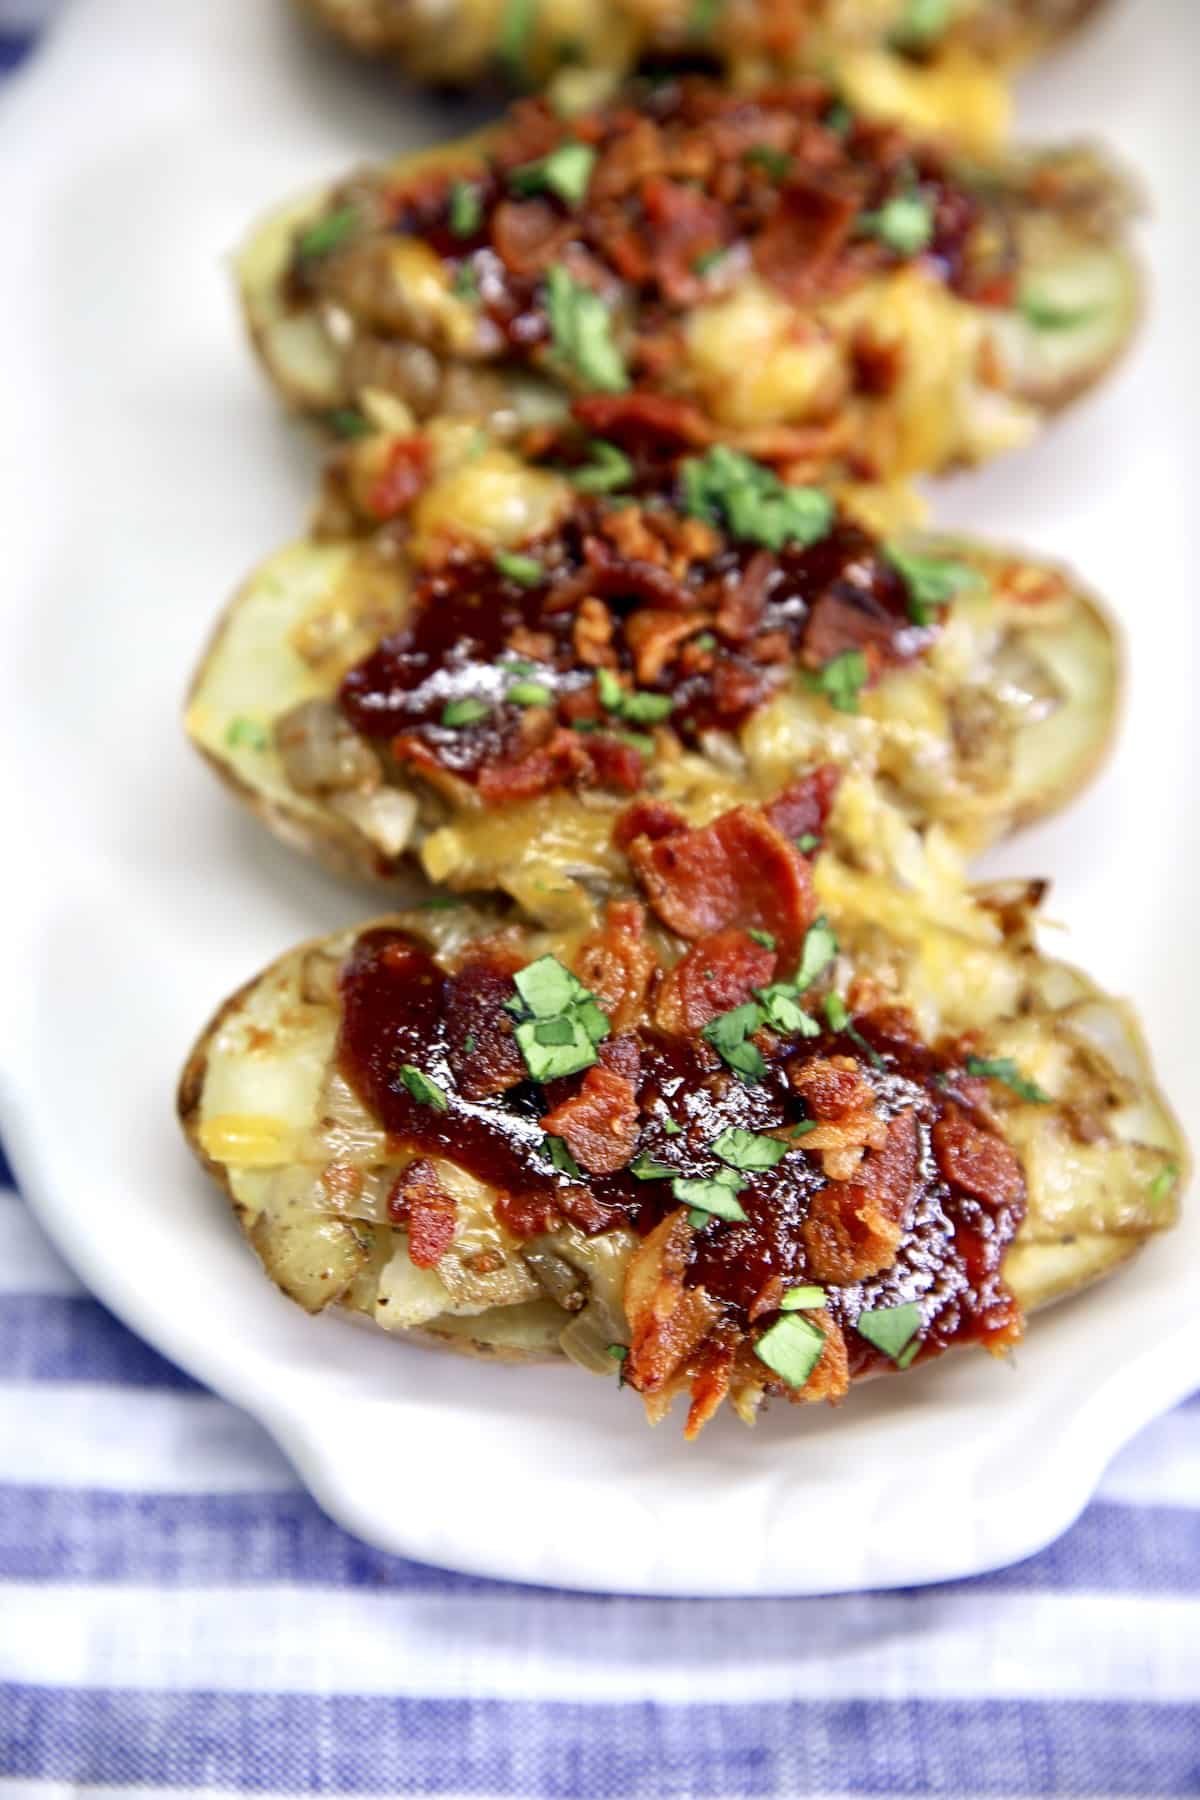 Platter of baked potatoes with bacon, bbq sauce, cheese.